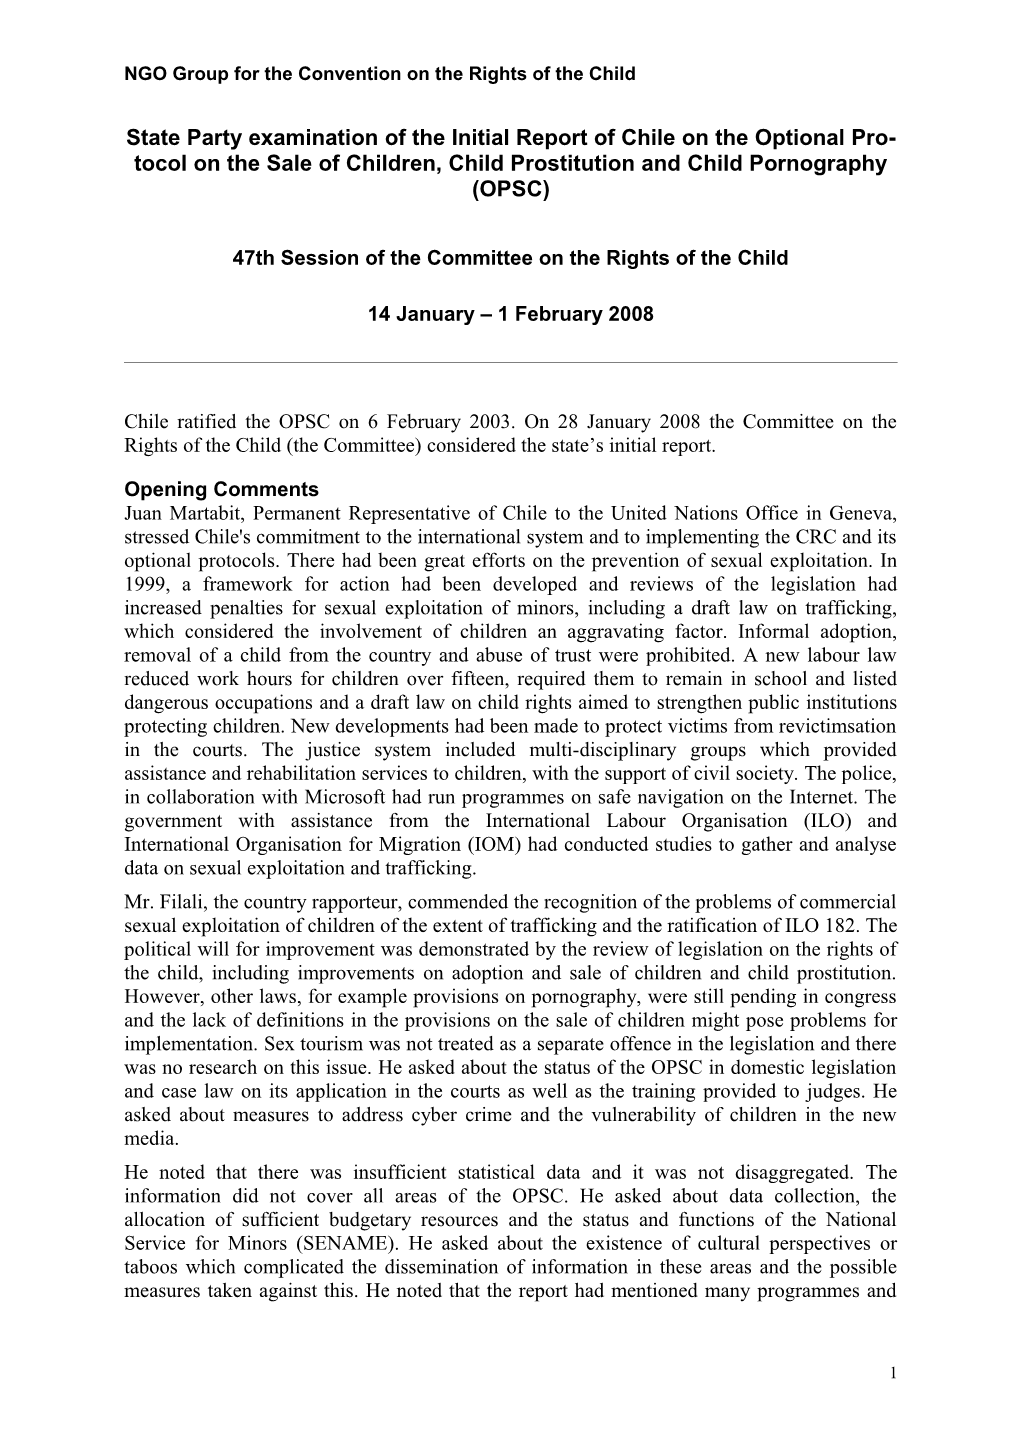 State Party Examination of the Initial Report of Chile on the Optional Protocol on The